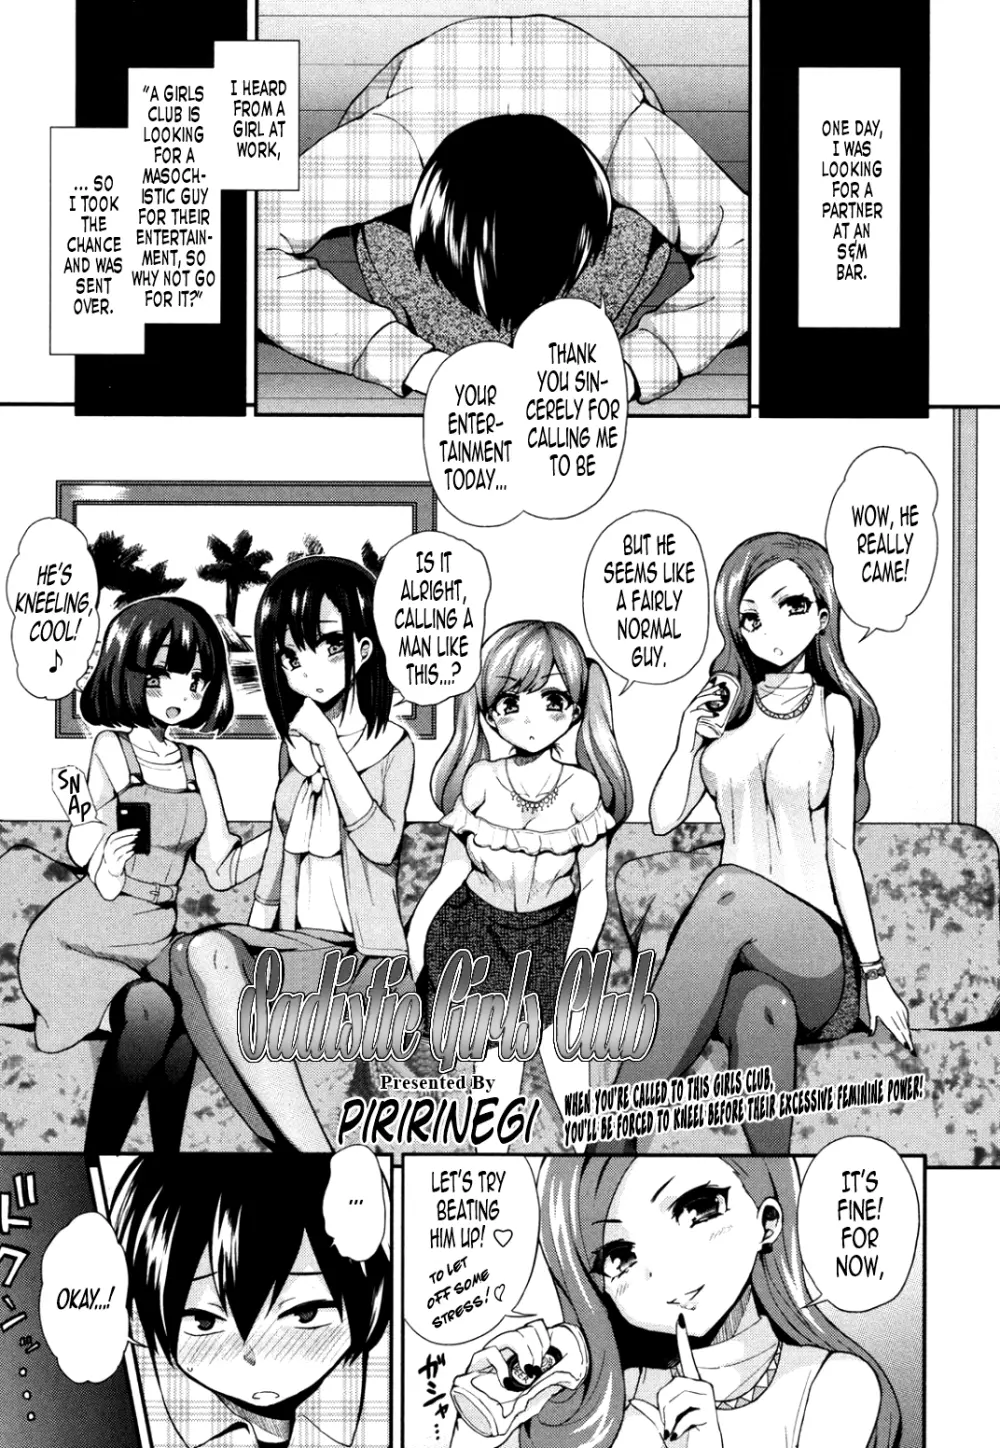 GIRL FOR M - CHAPTERS (VOL1 - 8 ) (ENGLISH) part n°1 Page.114